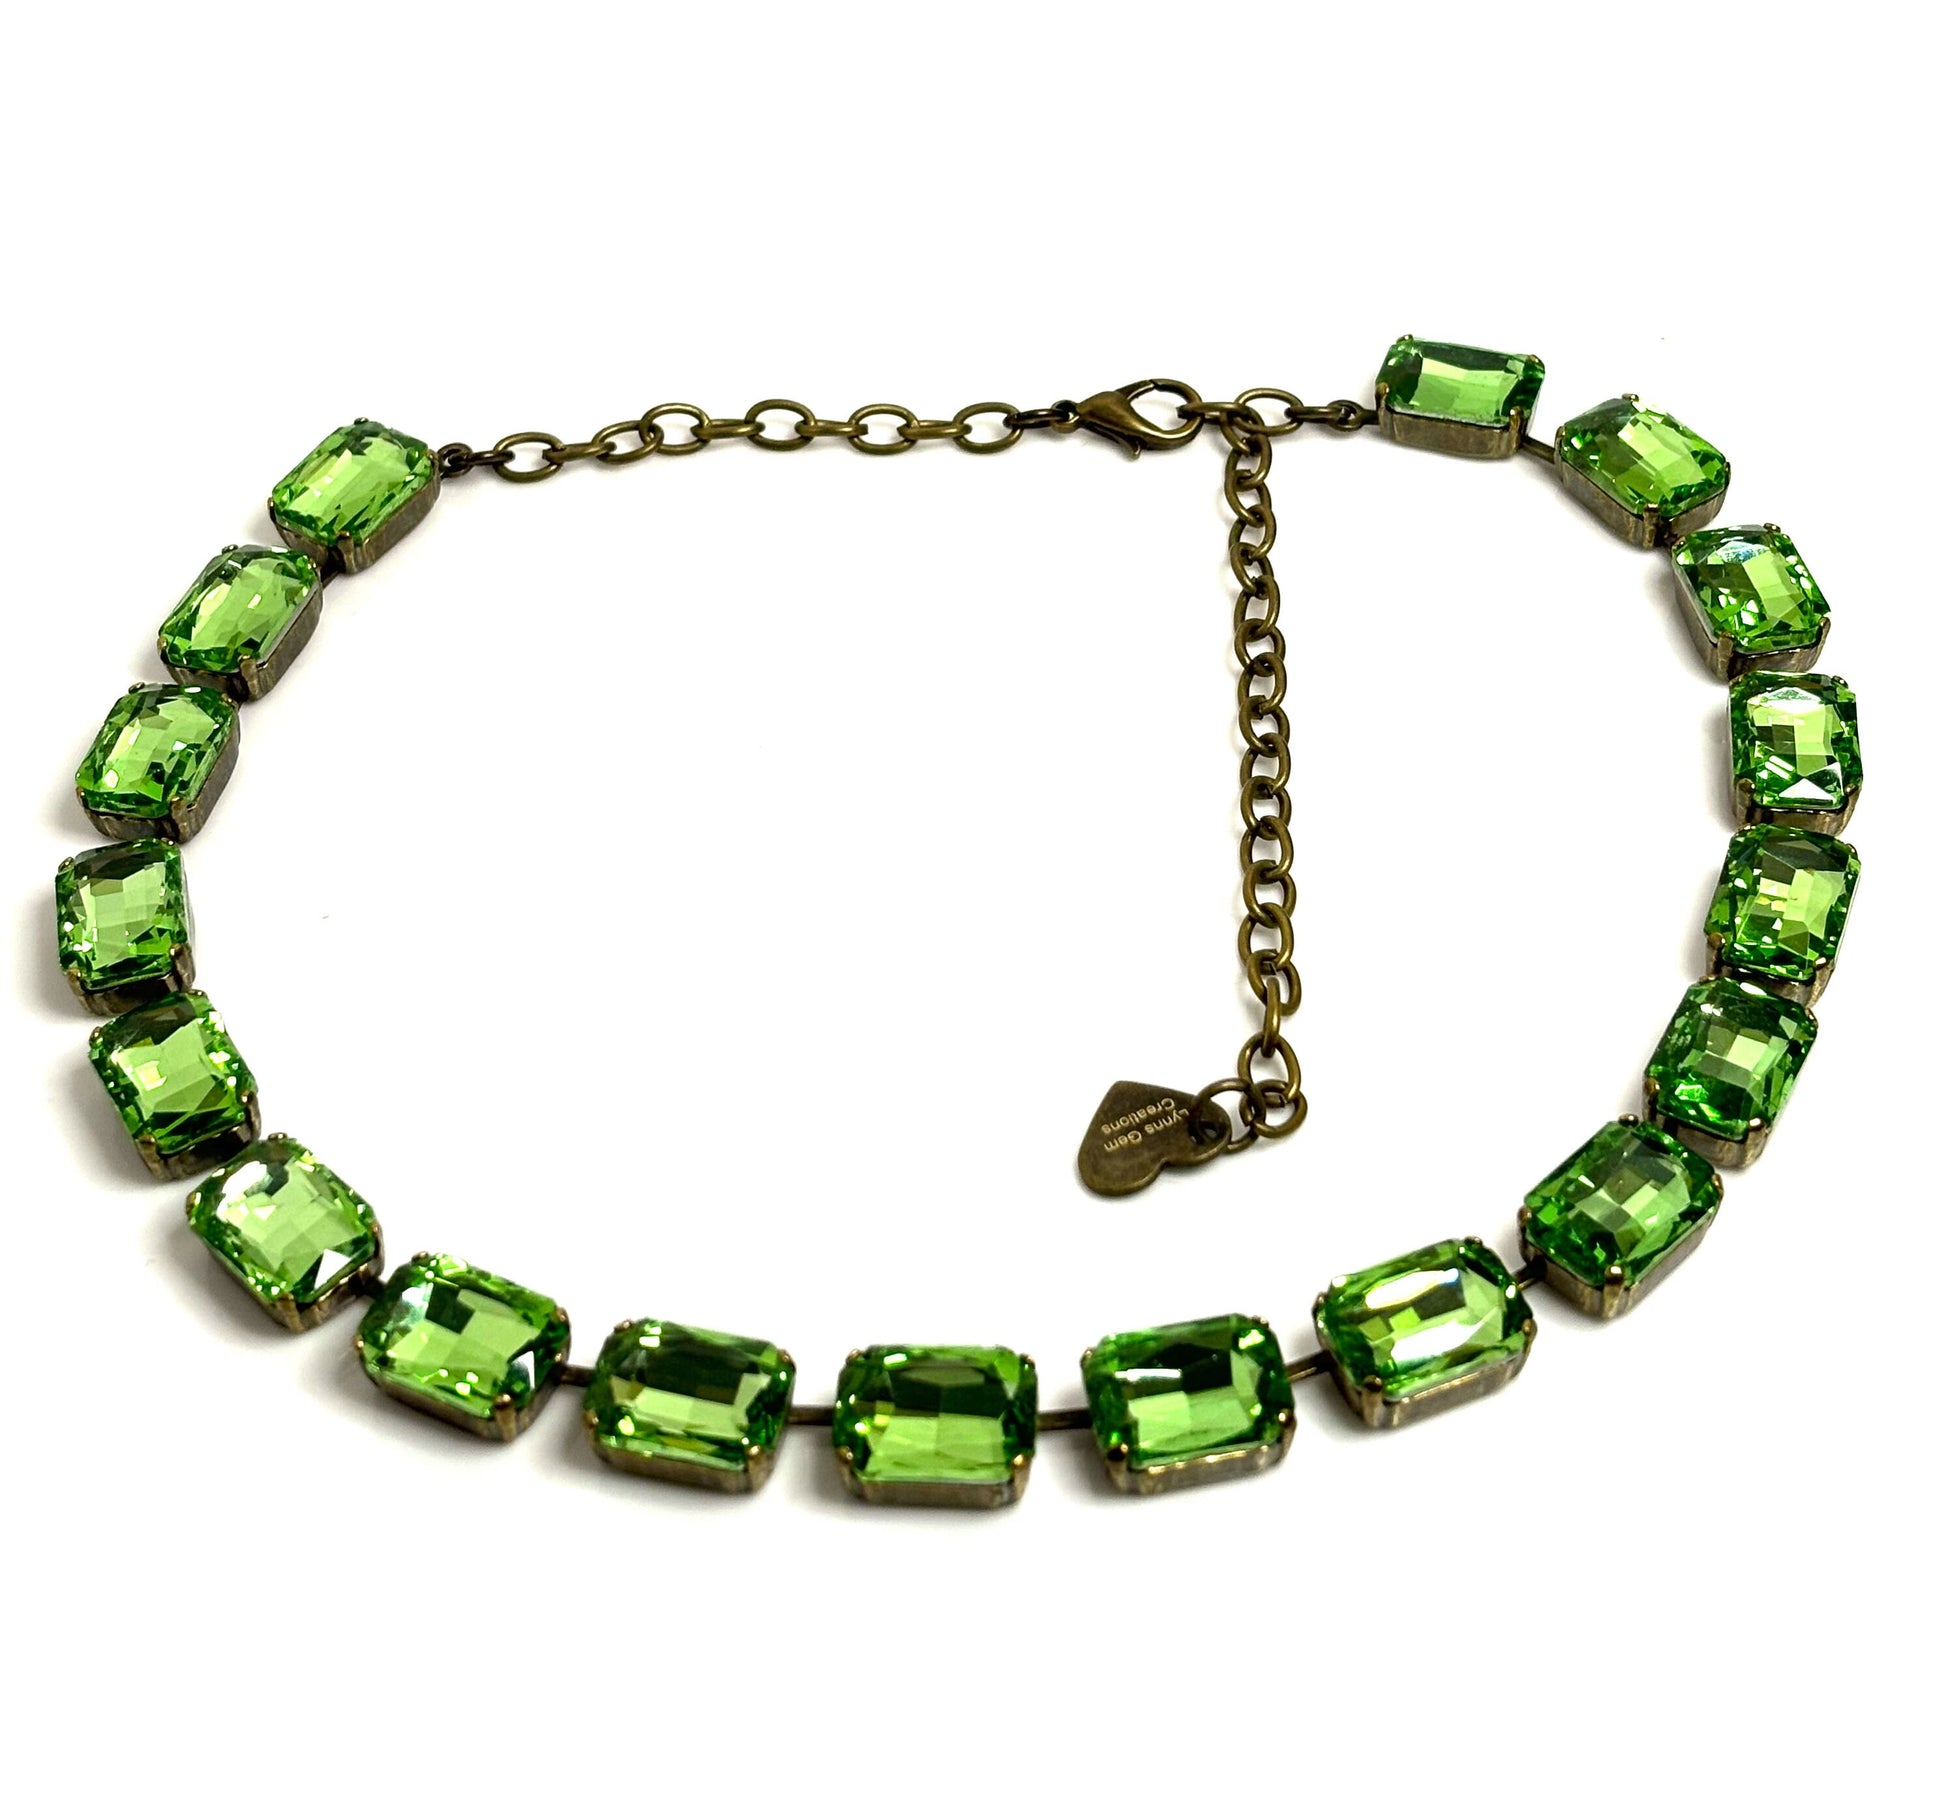 Emerald Peridot Crystal Georgian Collet Necklaces, Anna Wintour Style, Austrian Crystal, Riviere Necklace, Statement Necklaces for Women